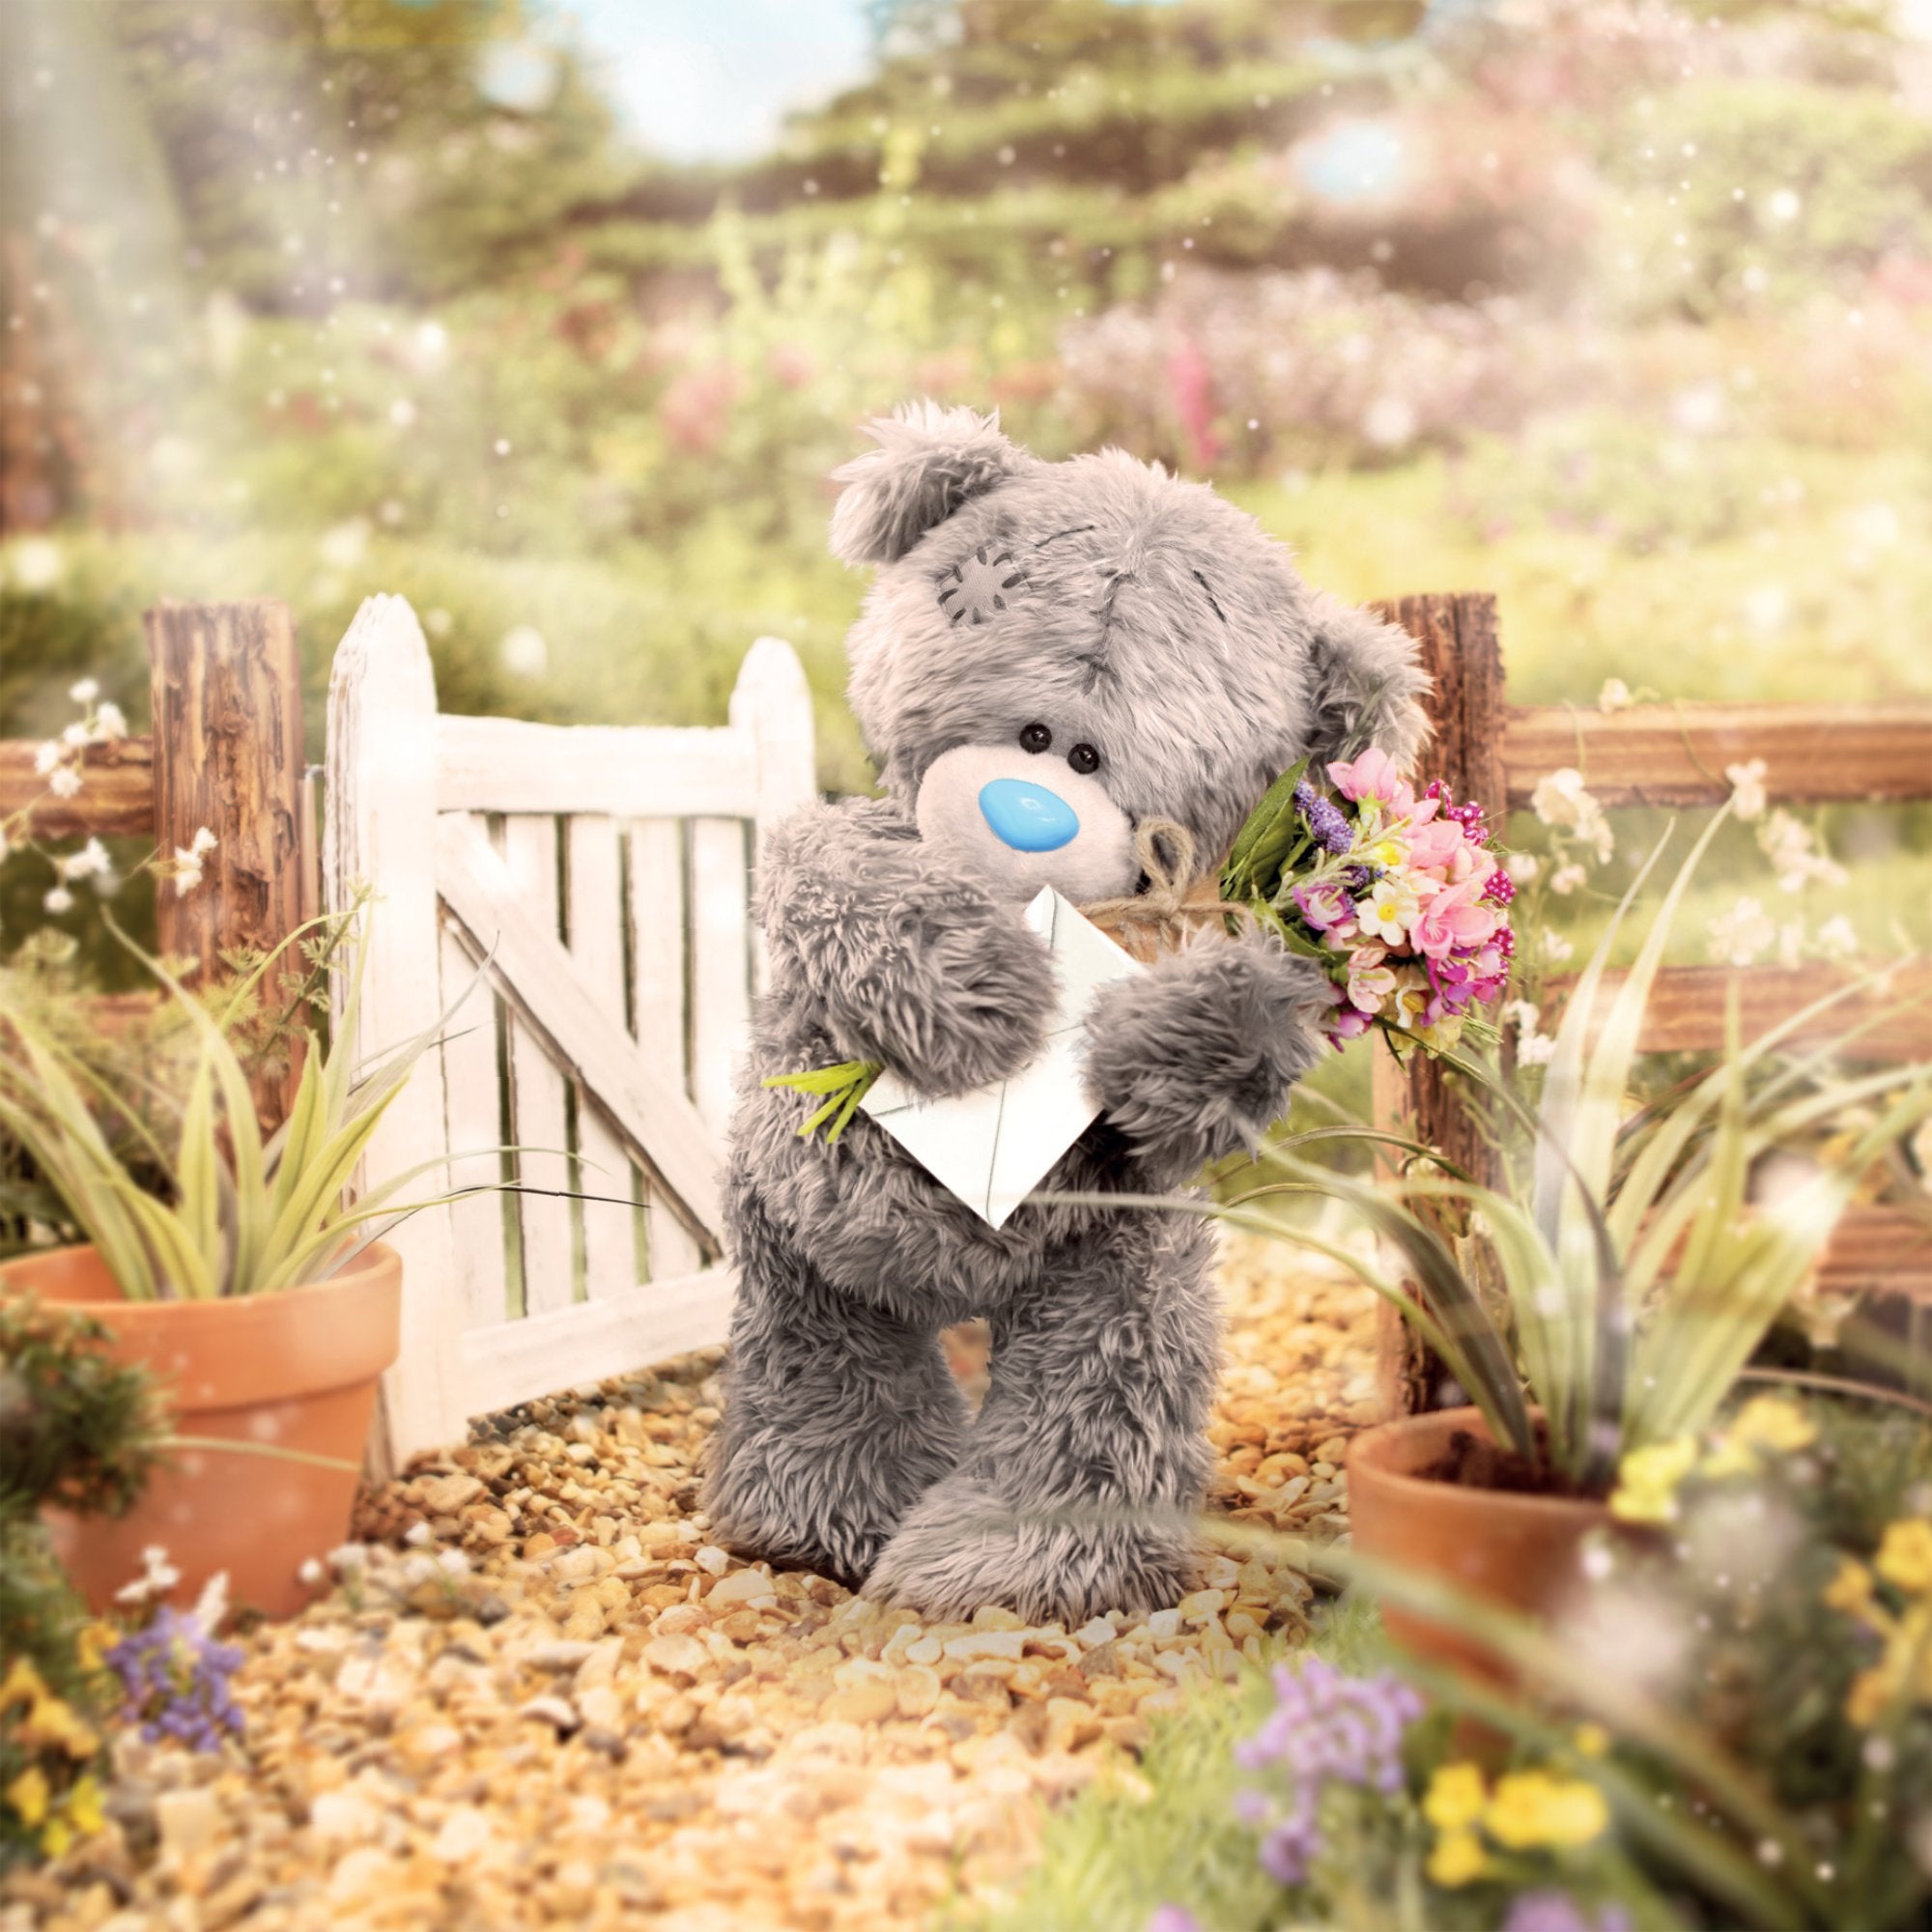 Photograph of Open Bear Holding Envelope Greetings Card at Nicole's Shop